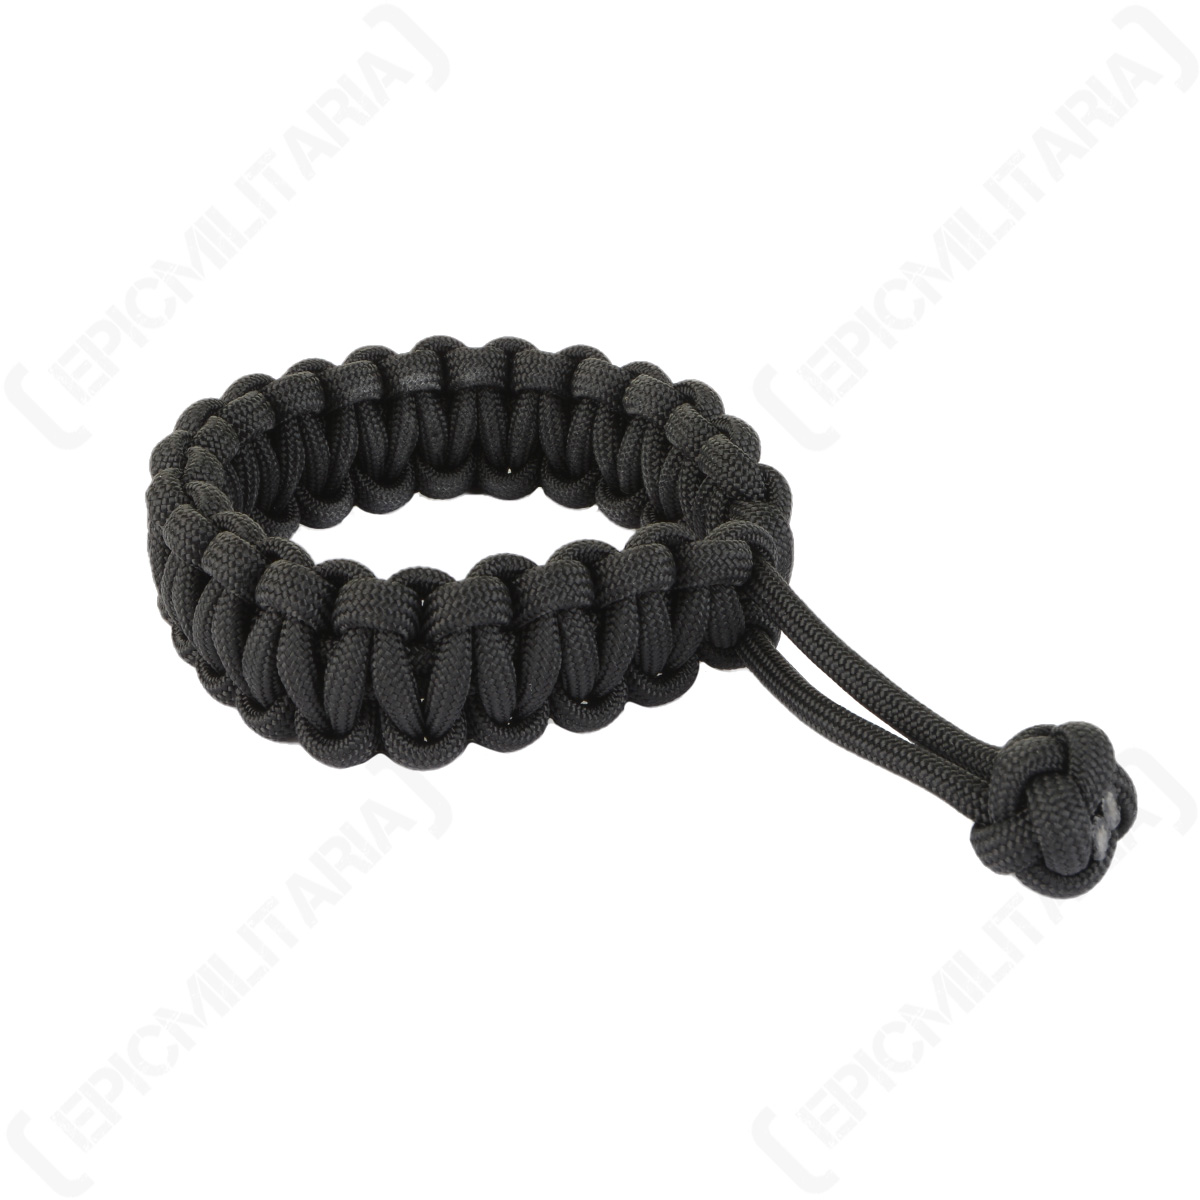 Paracord Bracelet Made of Mad Max Paracord, Army Style, a Great Gift for  Men. 